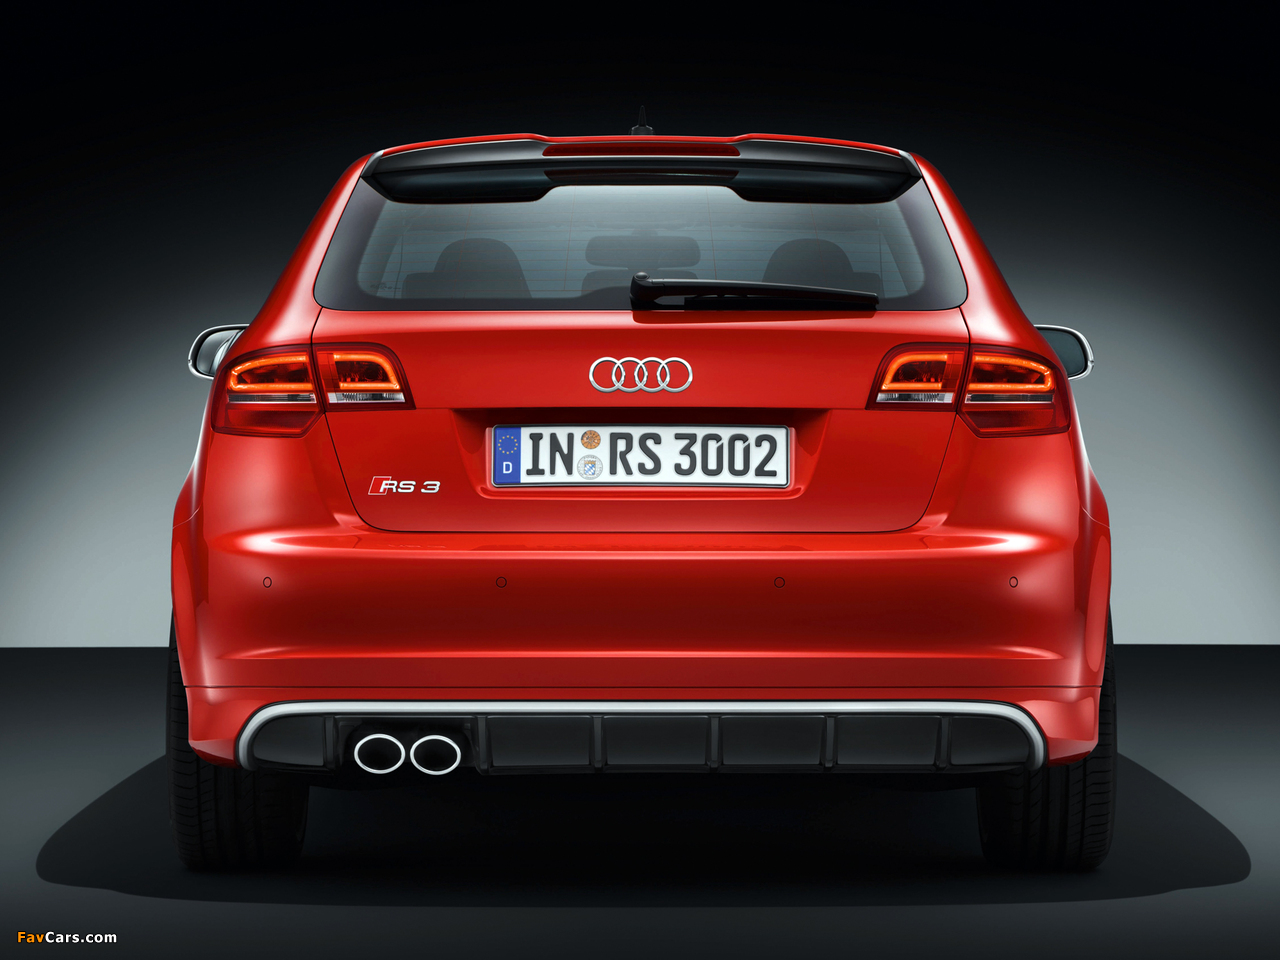 Audi RS3 Sportback (8PA) 2010 pictures (1280 x 960)